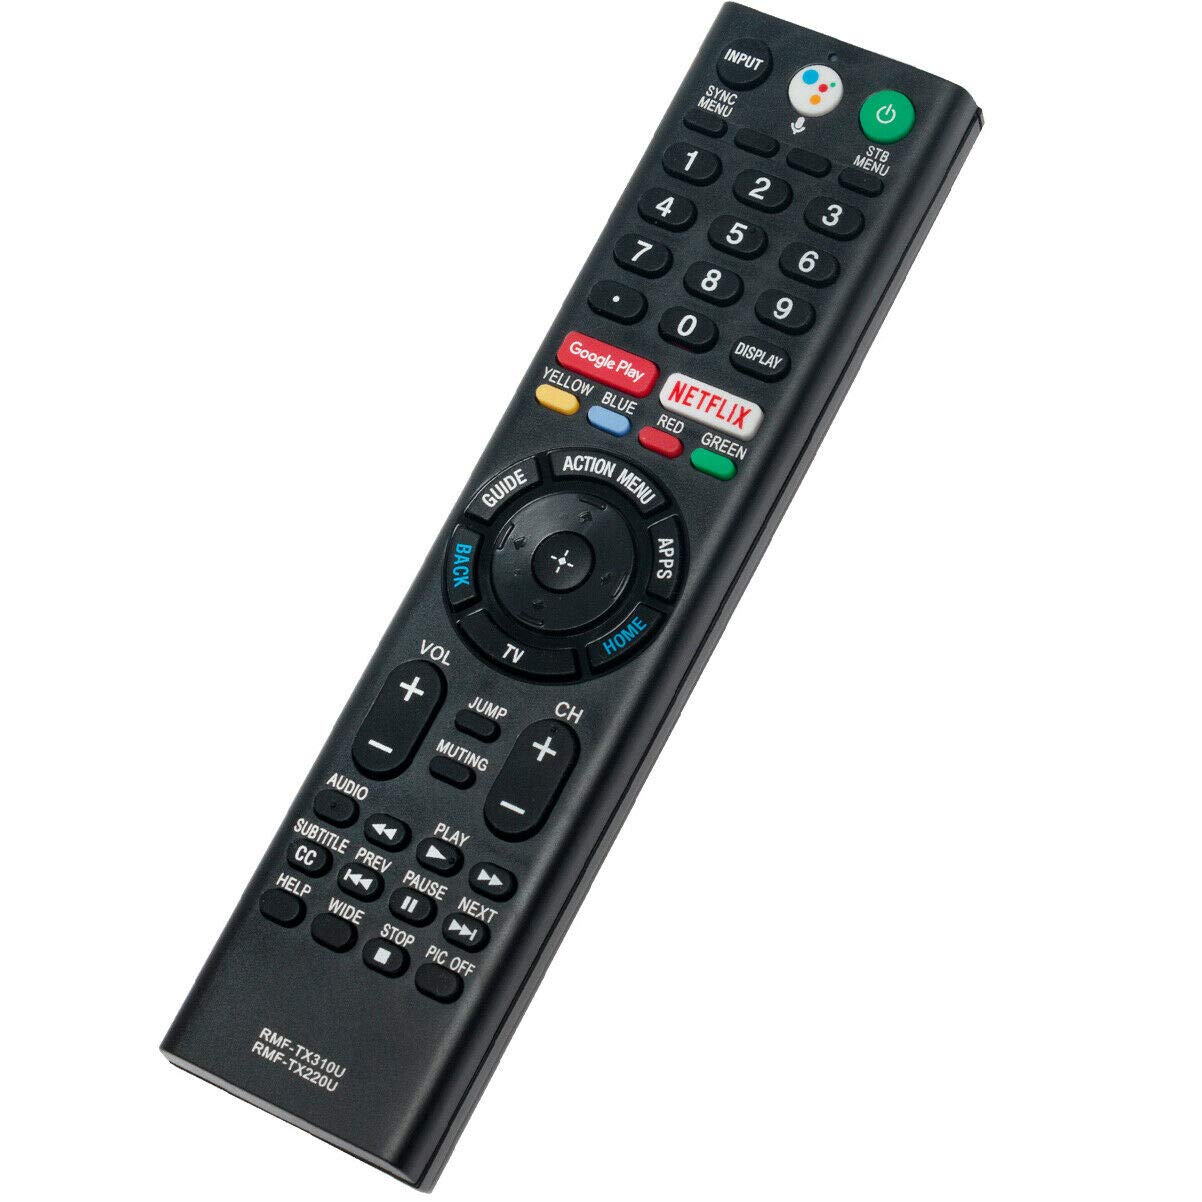 NKF RMF-TX220U Replace Remote for Sony TV XBR-55A9F XBR-65A9F XBR-55A8F XBR-65A8F